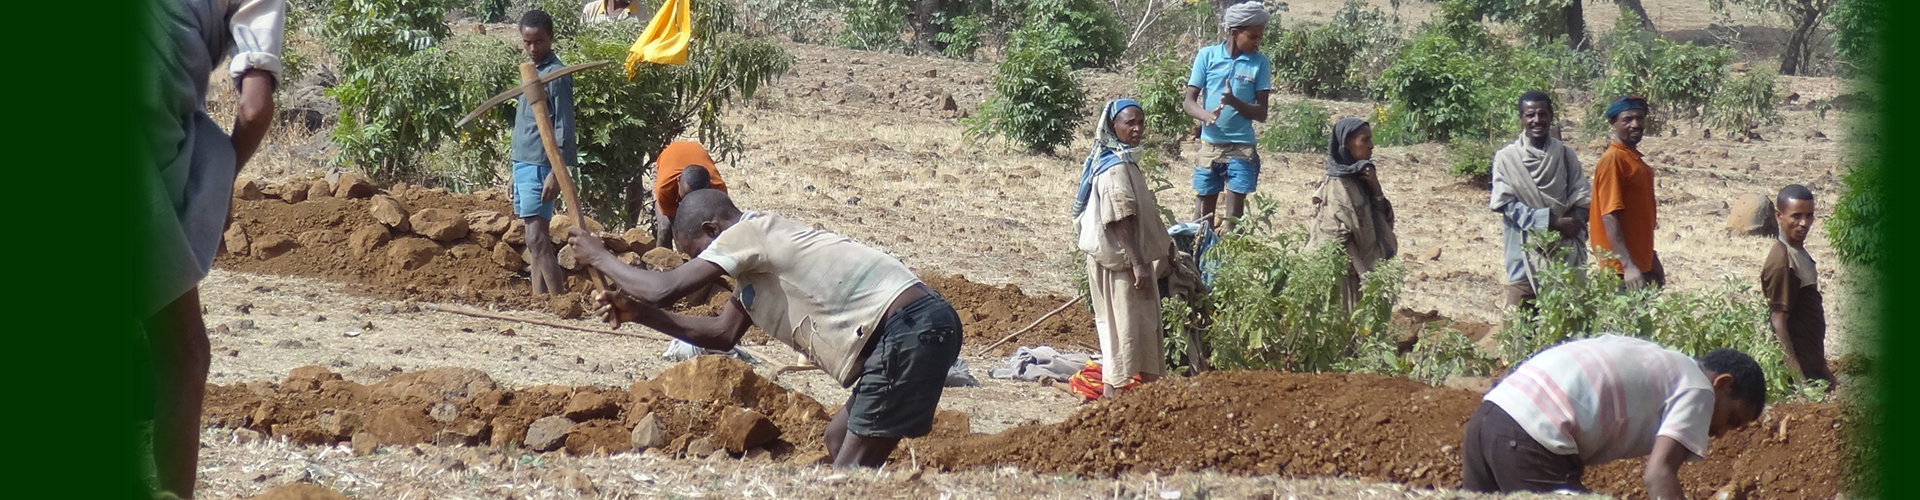 A collective effort to counter soil erosion and enhance soil fertility on sloping farmland in the Ethiopian Highlands. Photo by Hans Hurni